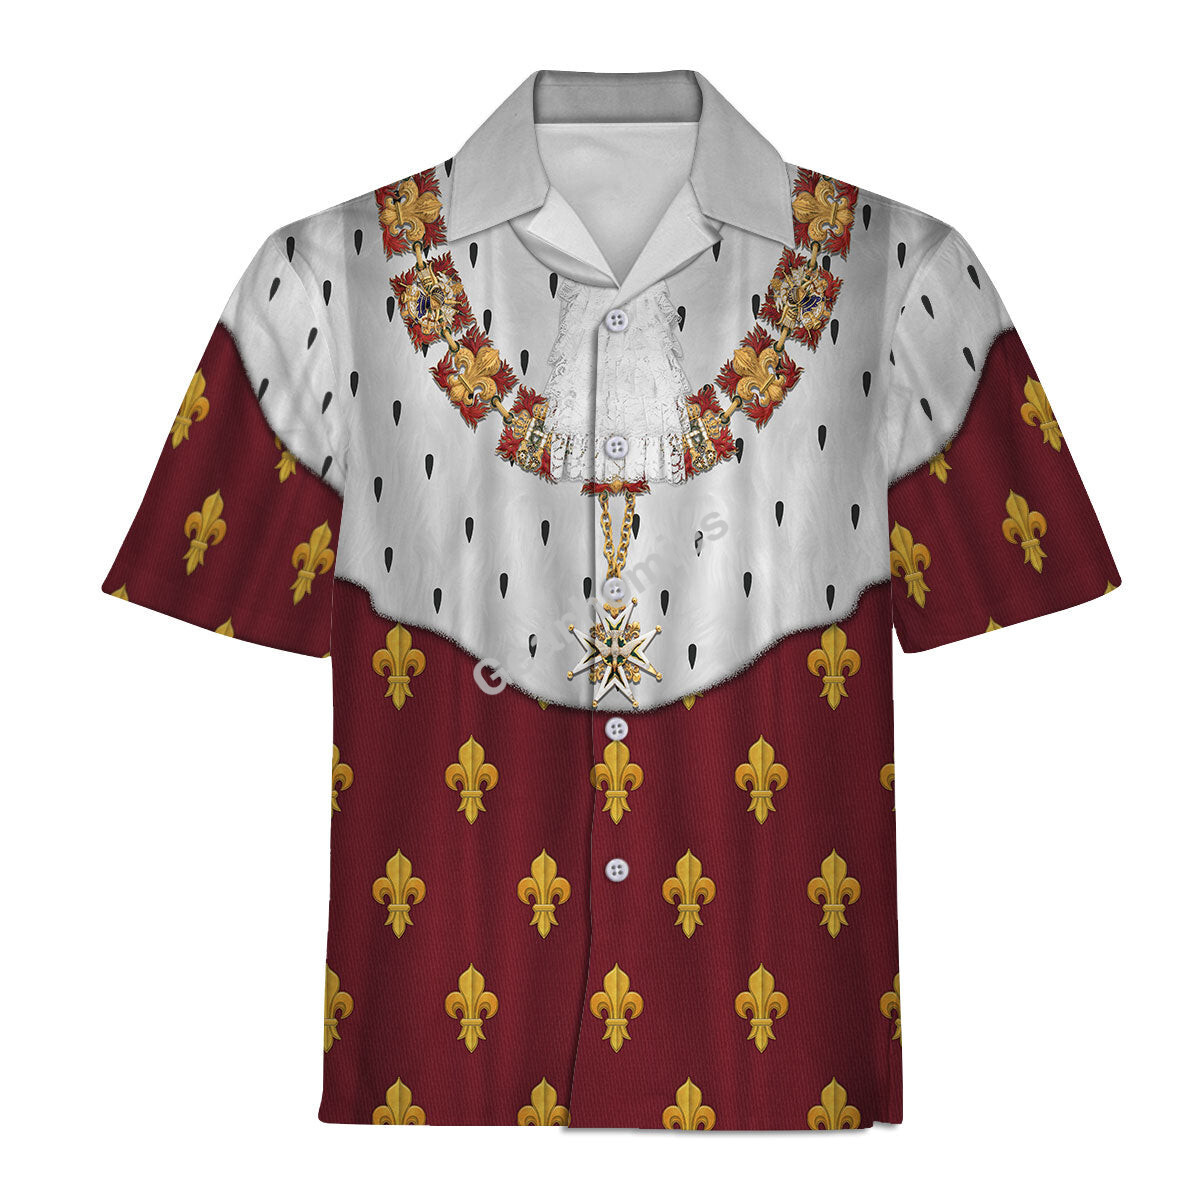 Charles X Of France Coronation Robes Red Costume All Over Print Hoodie ...